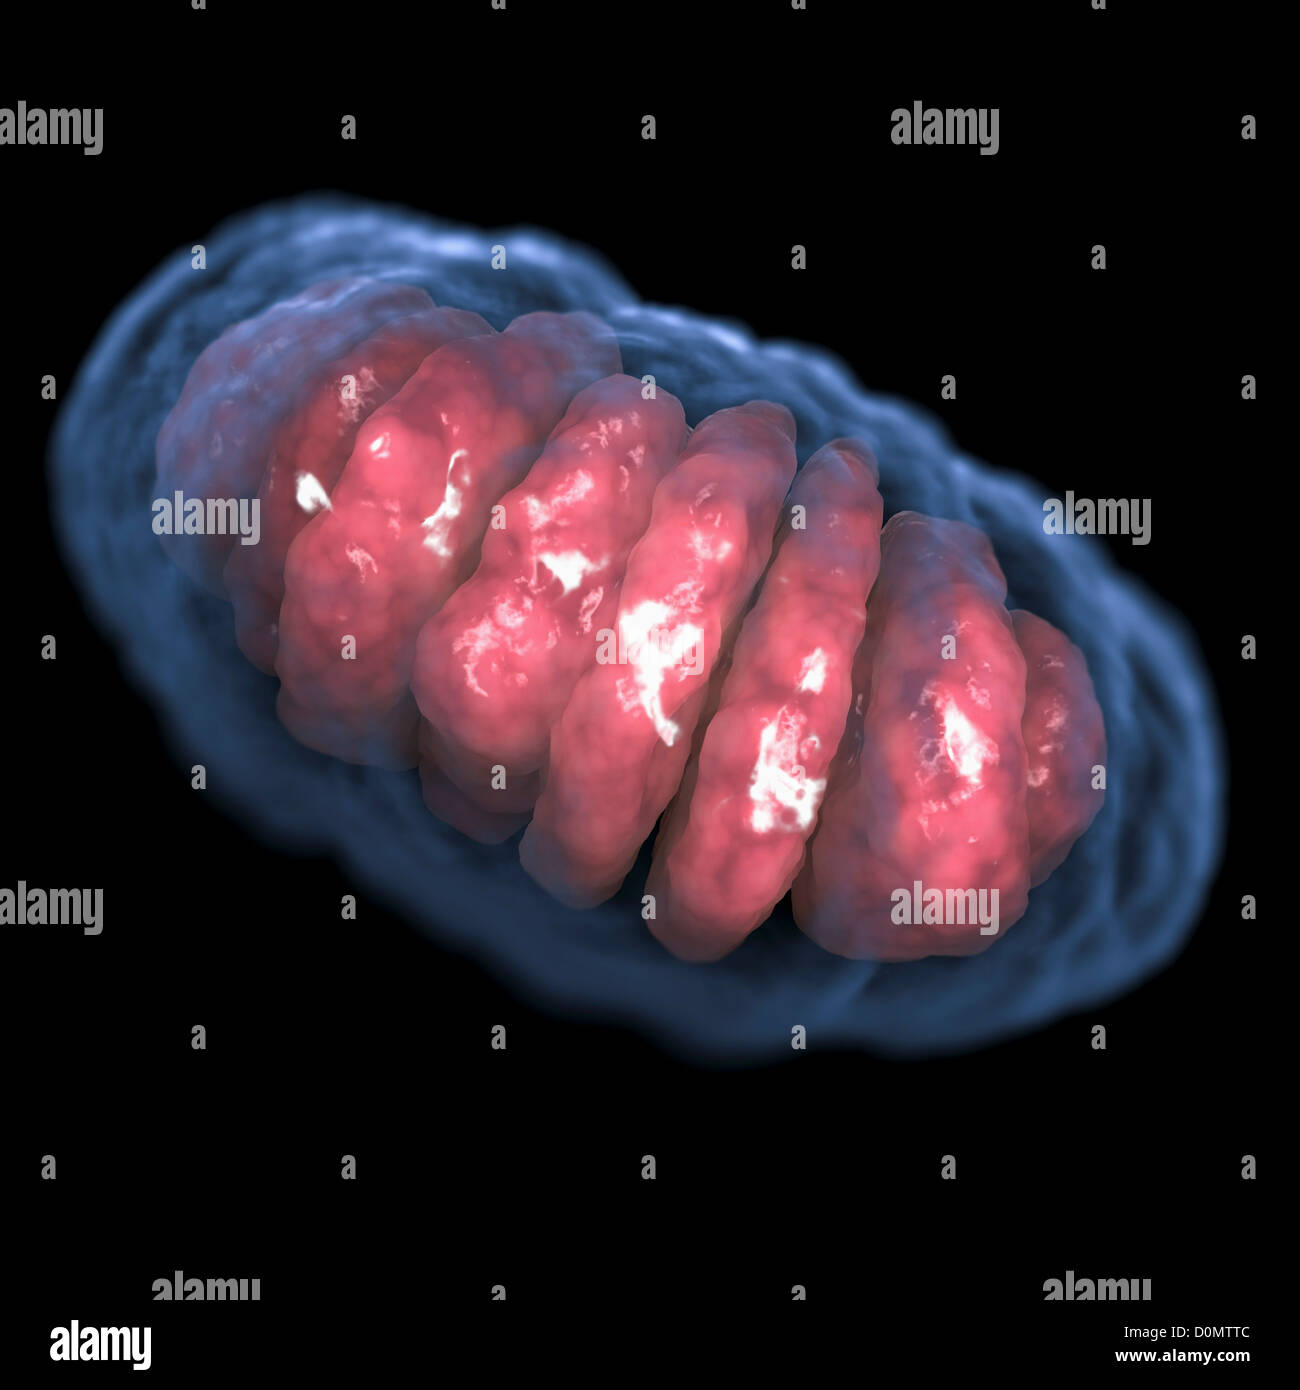 Interior view of a cell showing a mitochondrion. Stock Photo